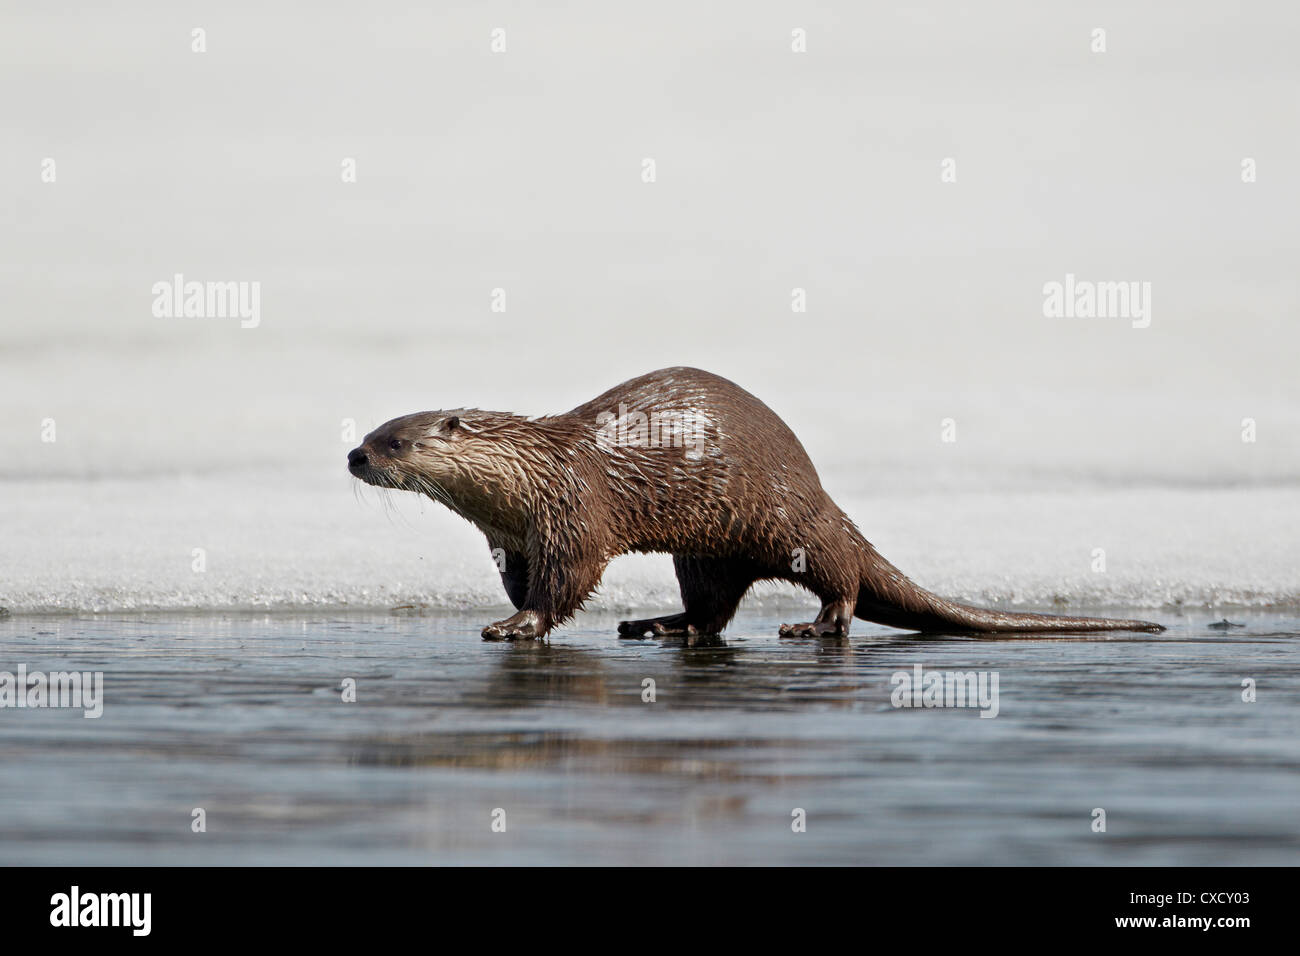 River Otter (Lutra canadensis) on frozen Yellowstone Lake, Yellowstone National Park, Wyoming, United States of America Stock Photo